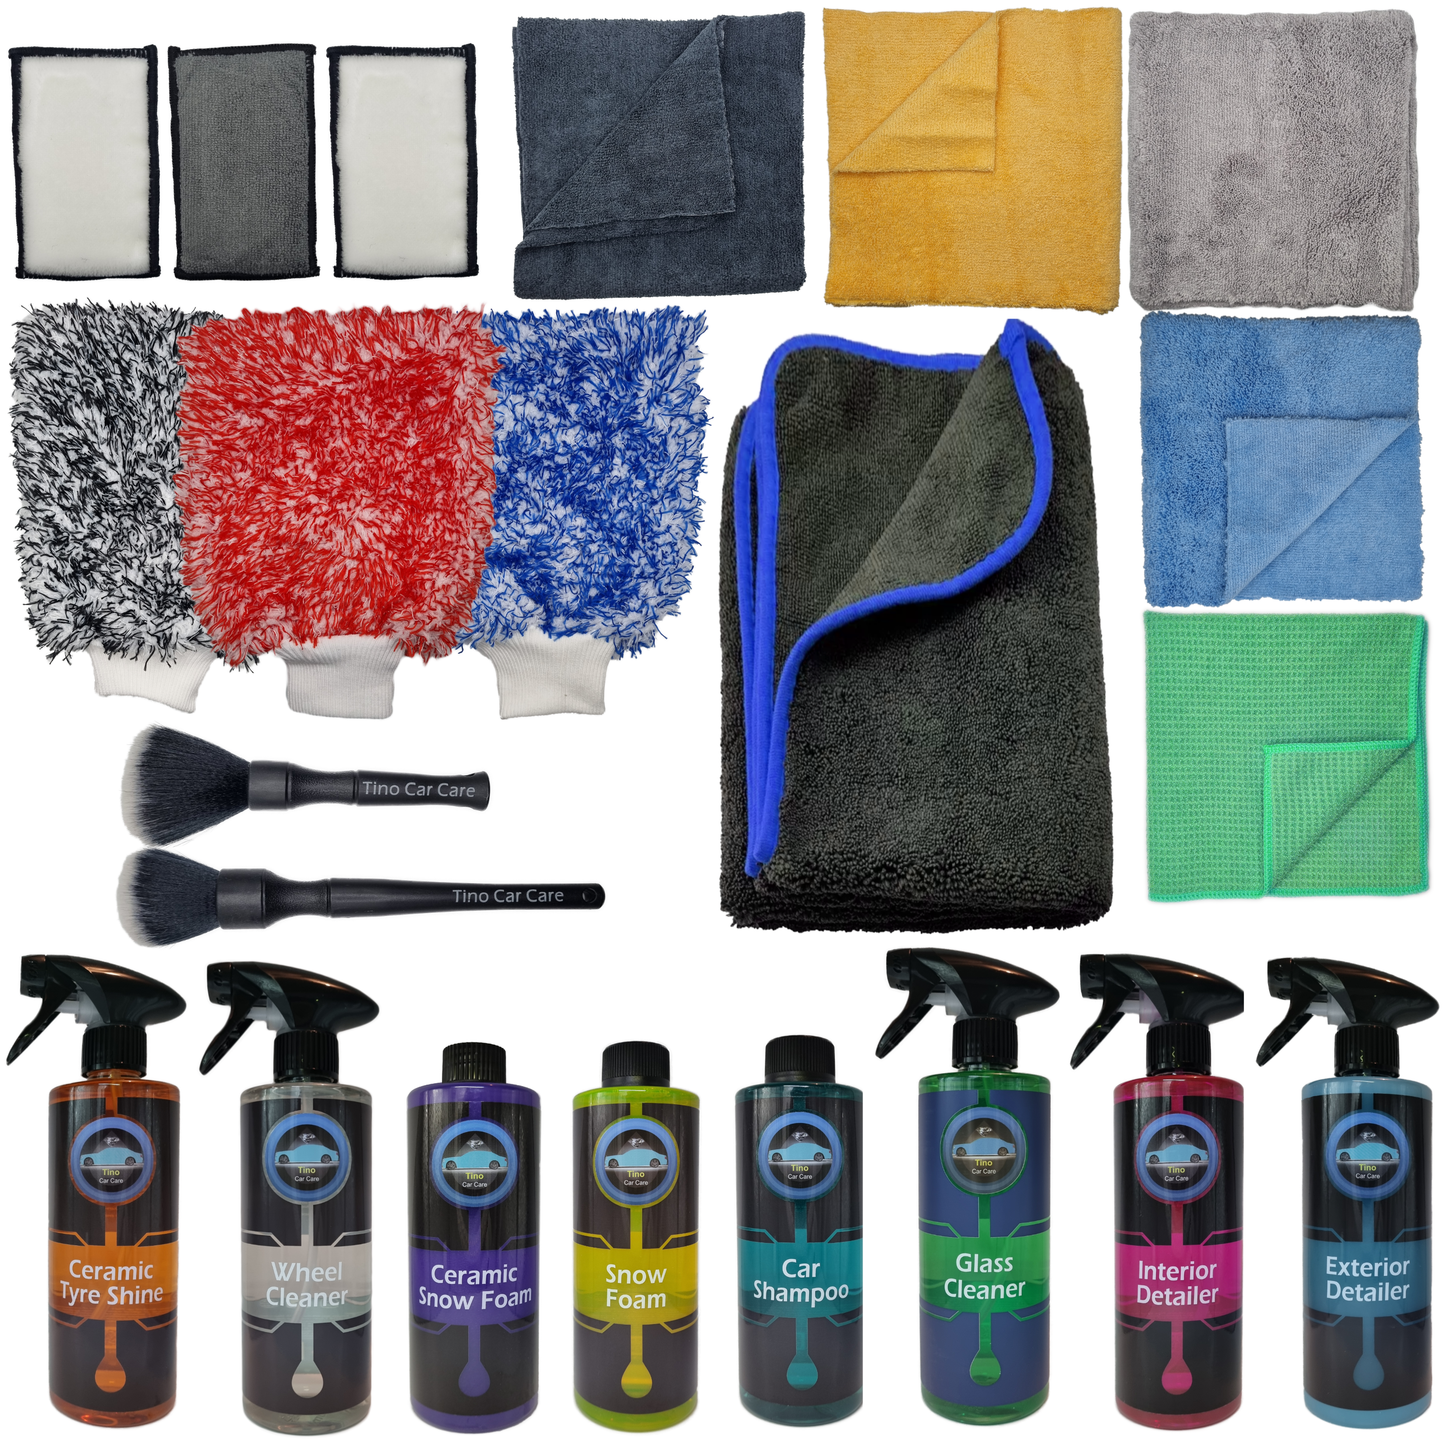 Tino Complete Car Cleaning Bundle